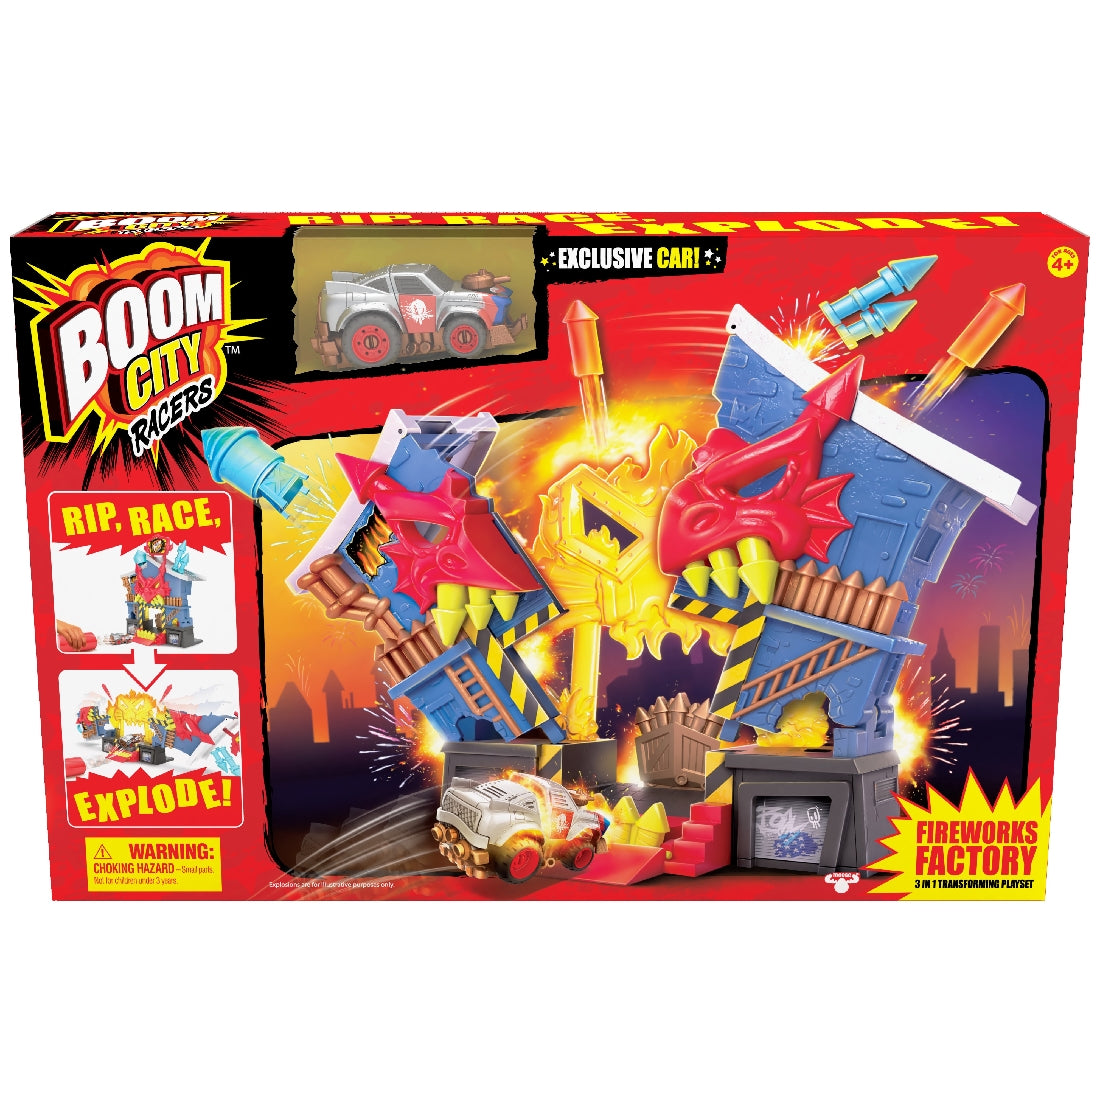 BOOM CITY RACERS S1 FIREWORKS FACTORY PLAYSET